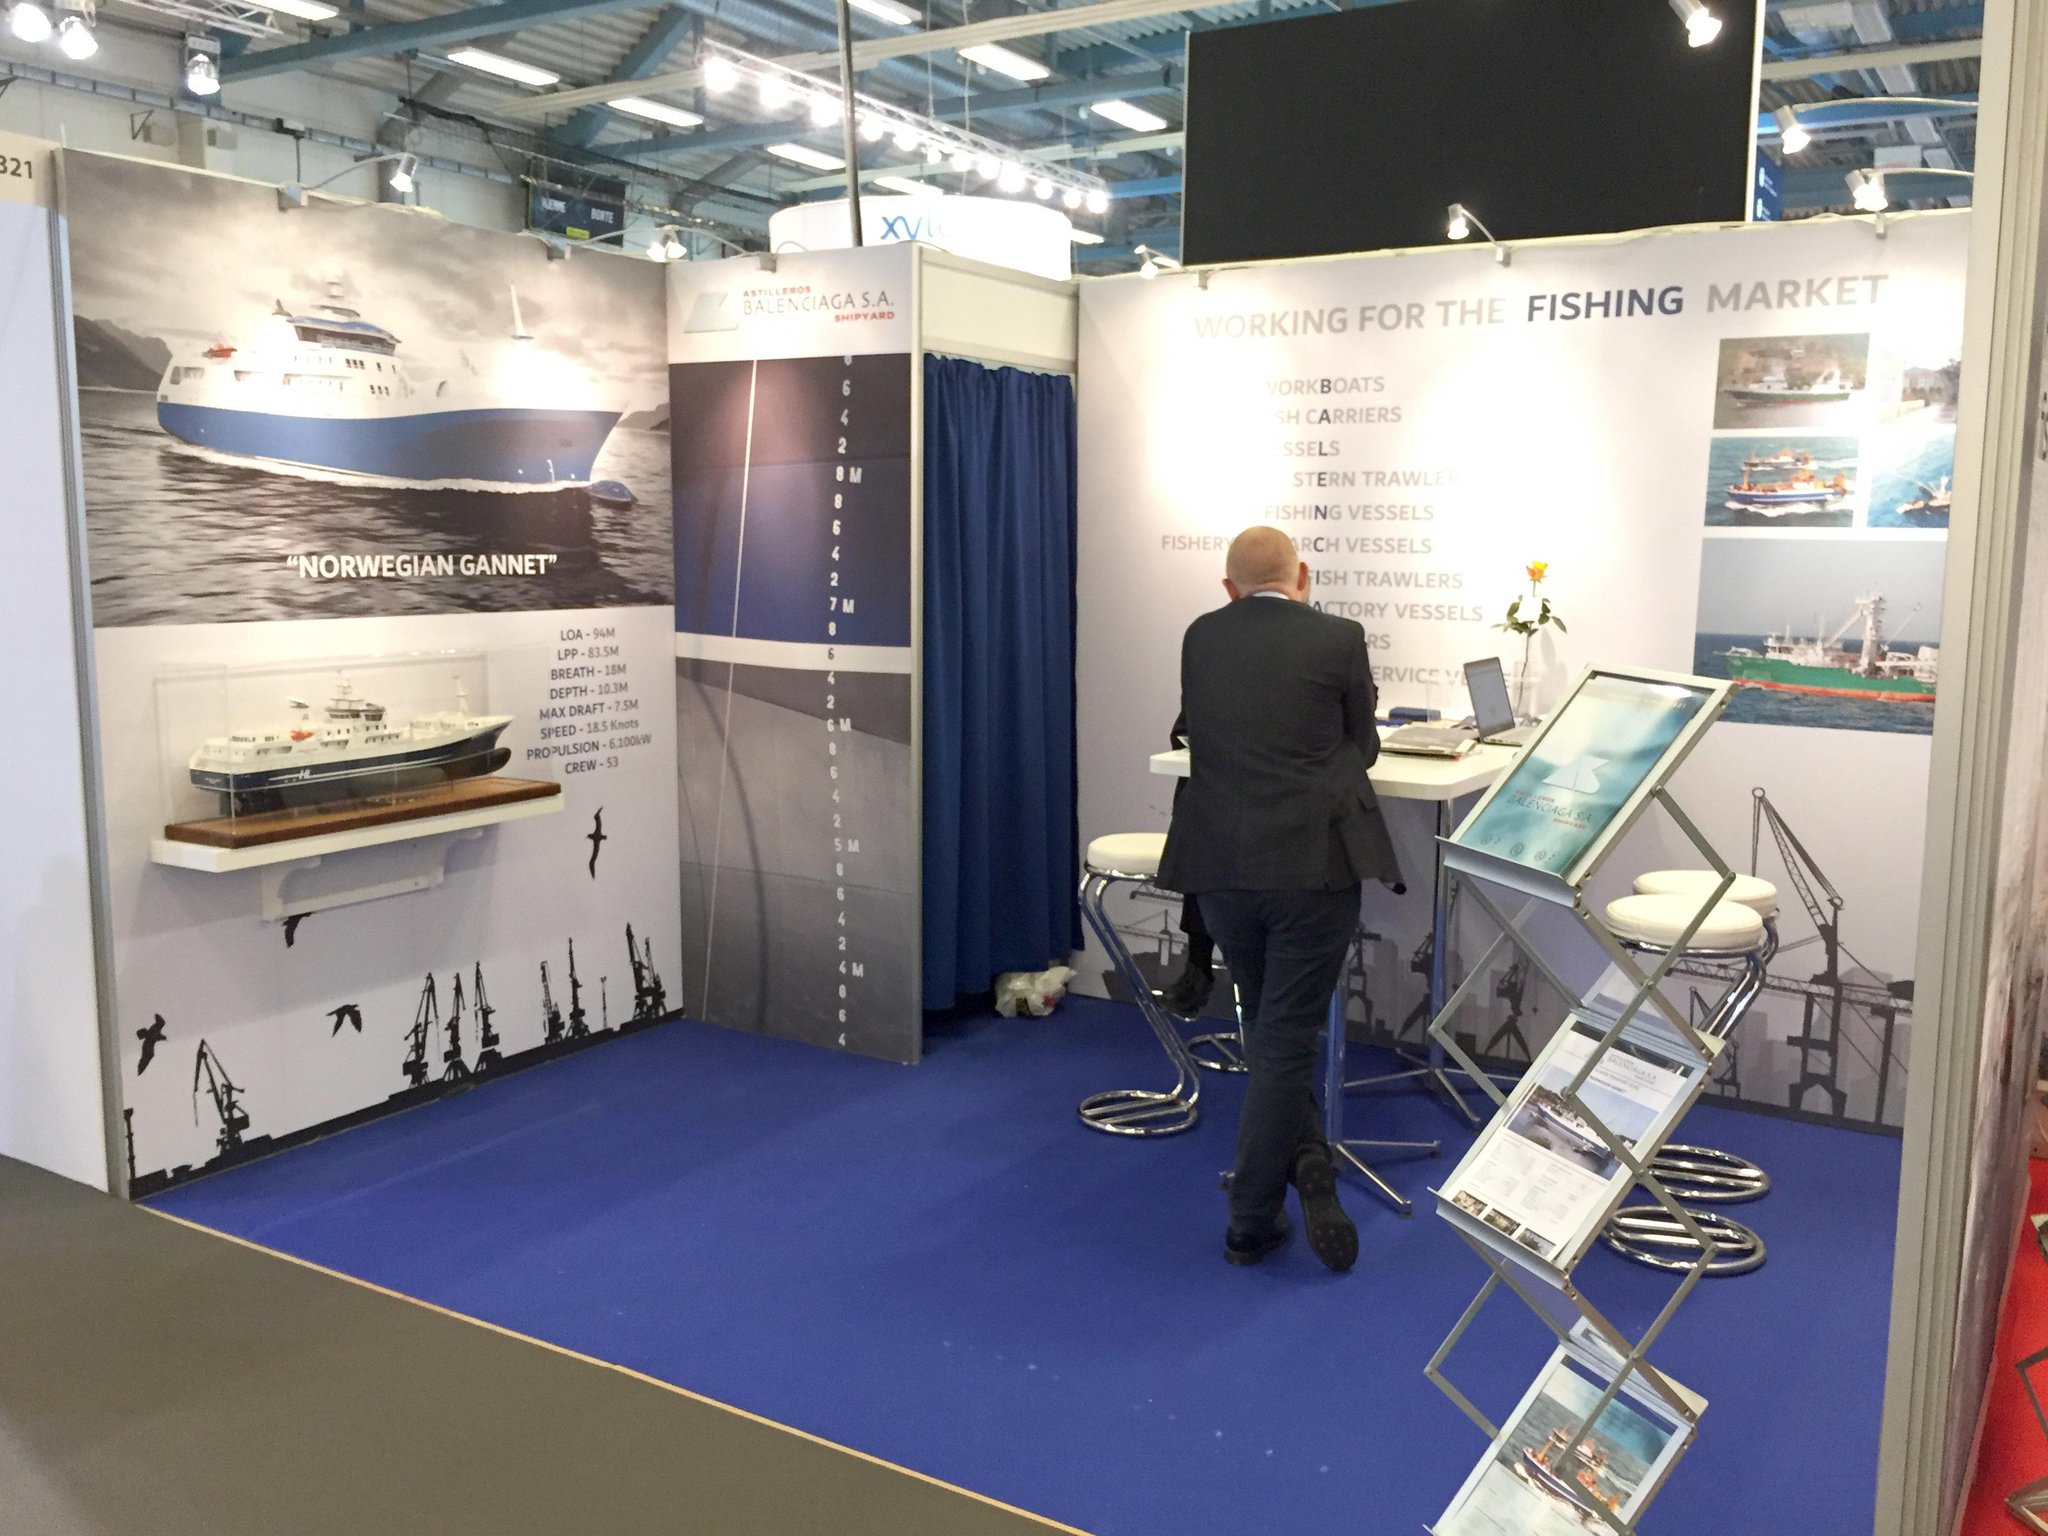 AstillerosBalenciaga on Twitter: "BALENCIAGA Shipyard is present in  Nor-Fishing 2018. Visit us at our Stand D-323. @NorFishing #Norway  #NorFishing2018 https://t.co/9SHVi1cbzU" / Twitter